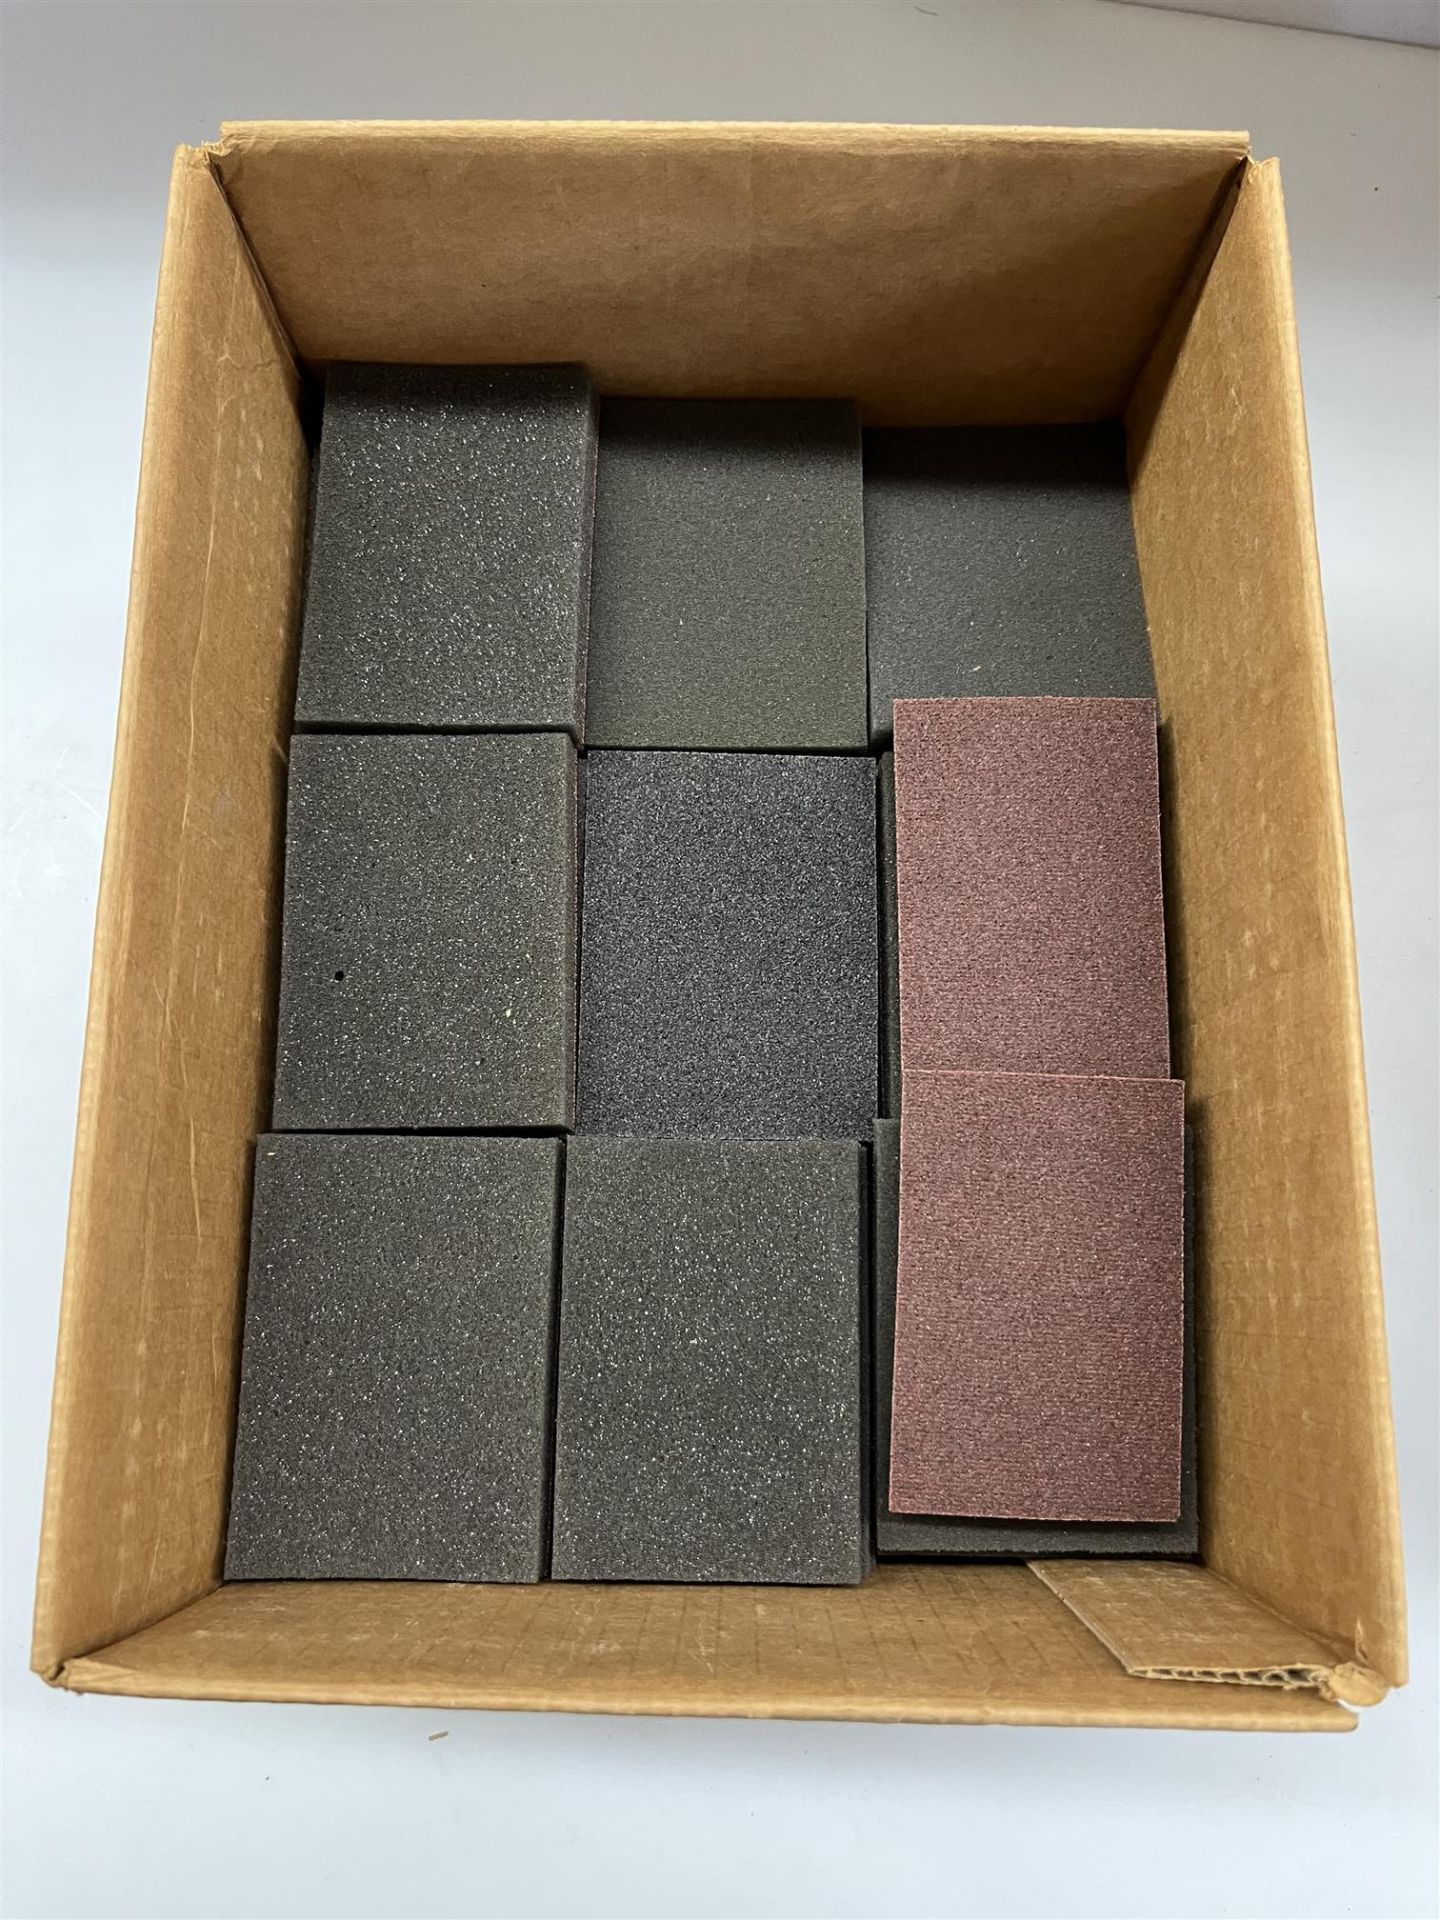 Assorted Lot of Sandpaper - Quantity: x3 boxes - Image 2 of 2